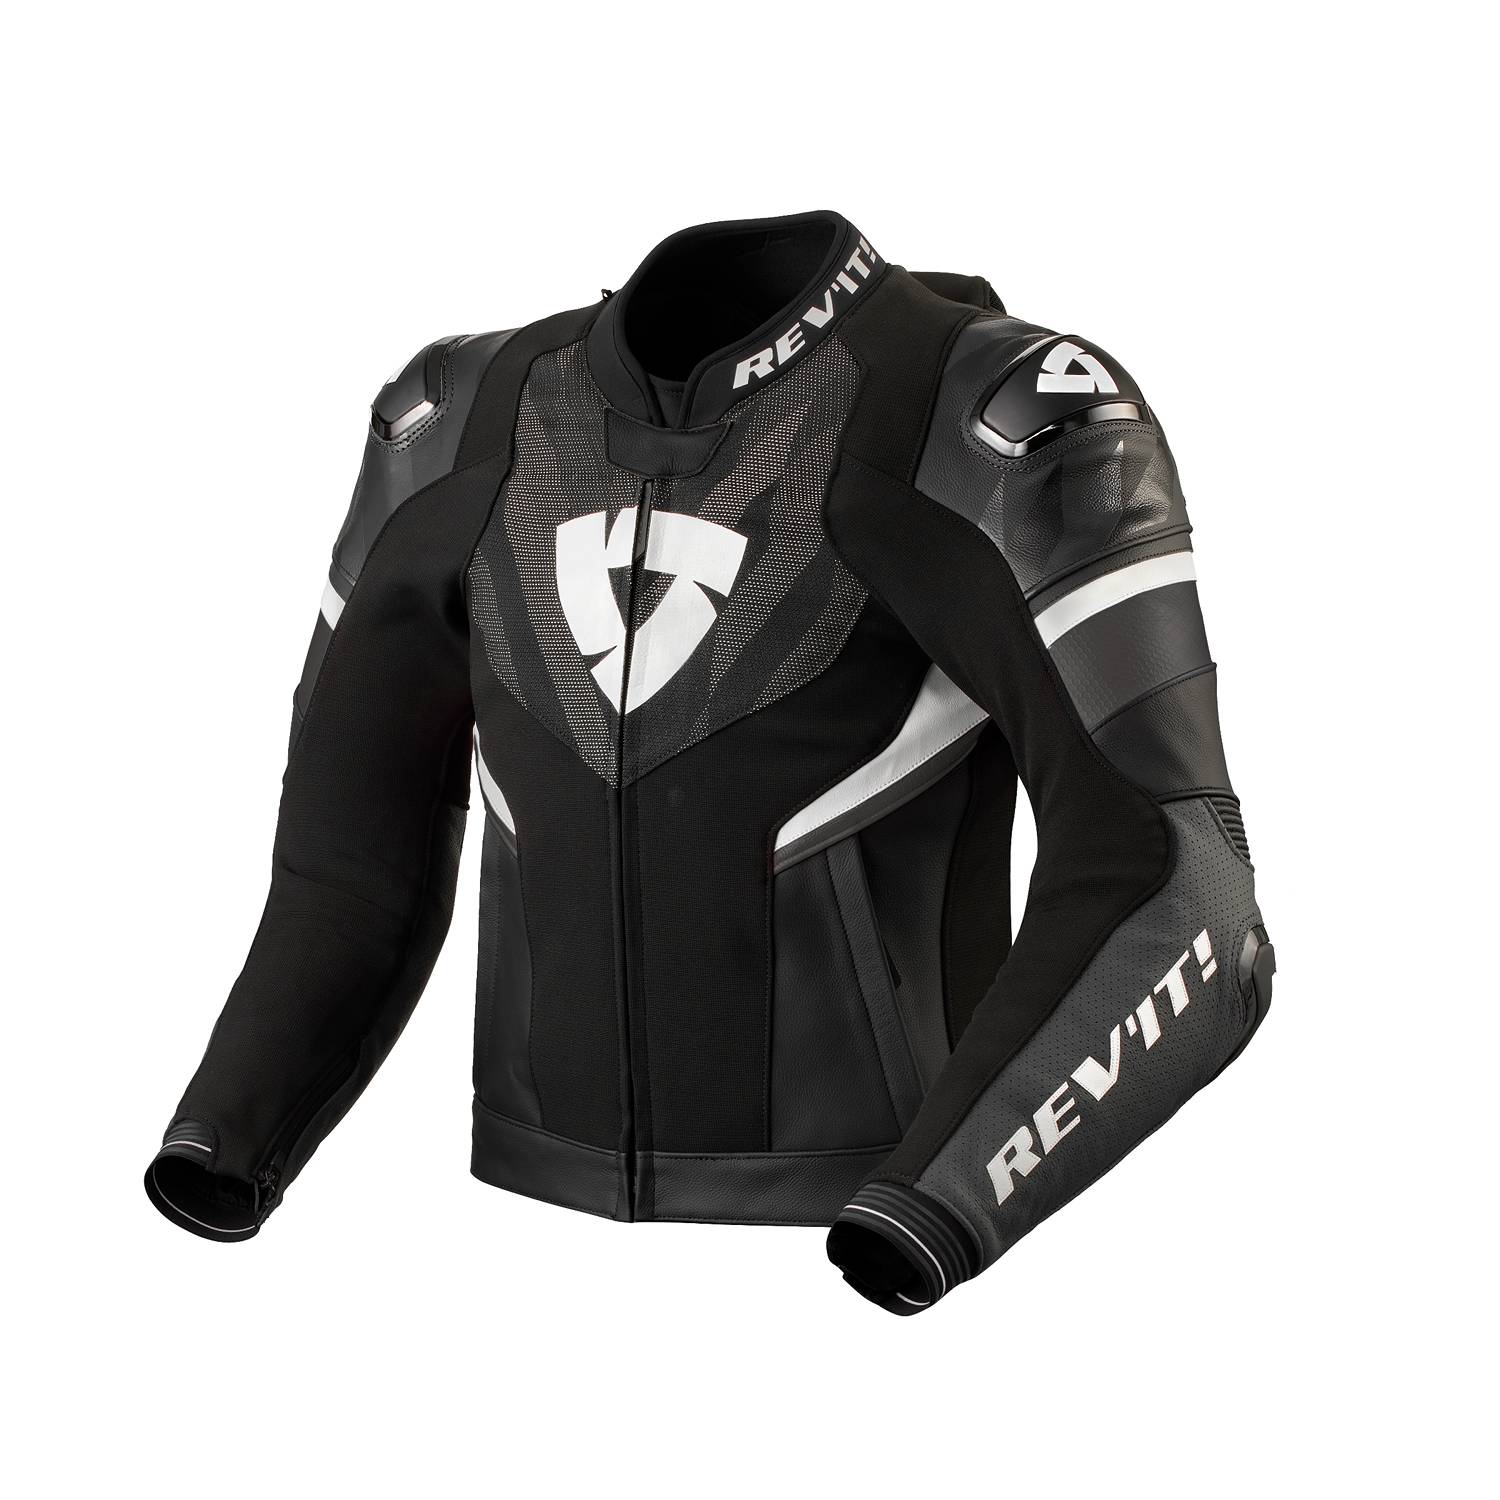 Image of REV'IT! Hyperspeed 2 Pro Veste Noir Anthracite Taille 56